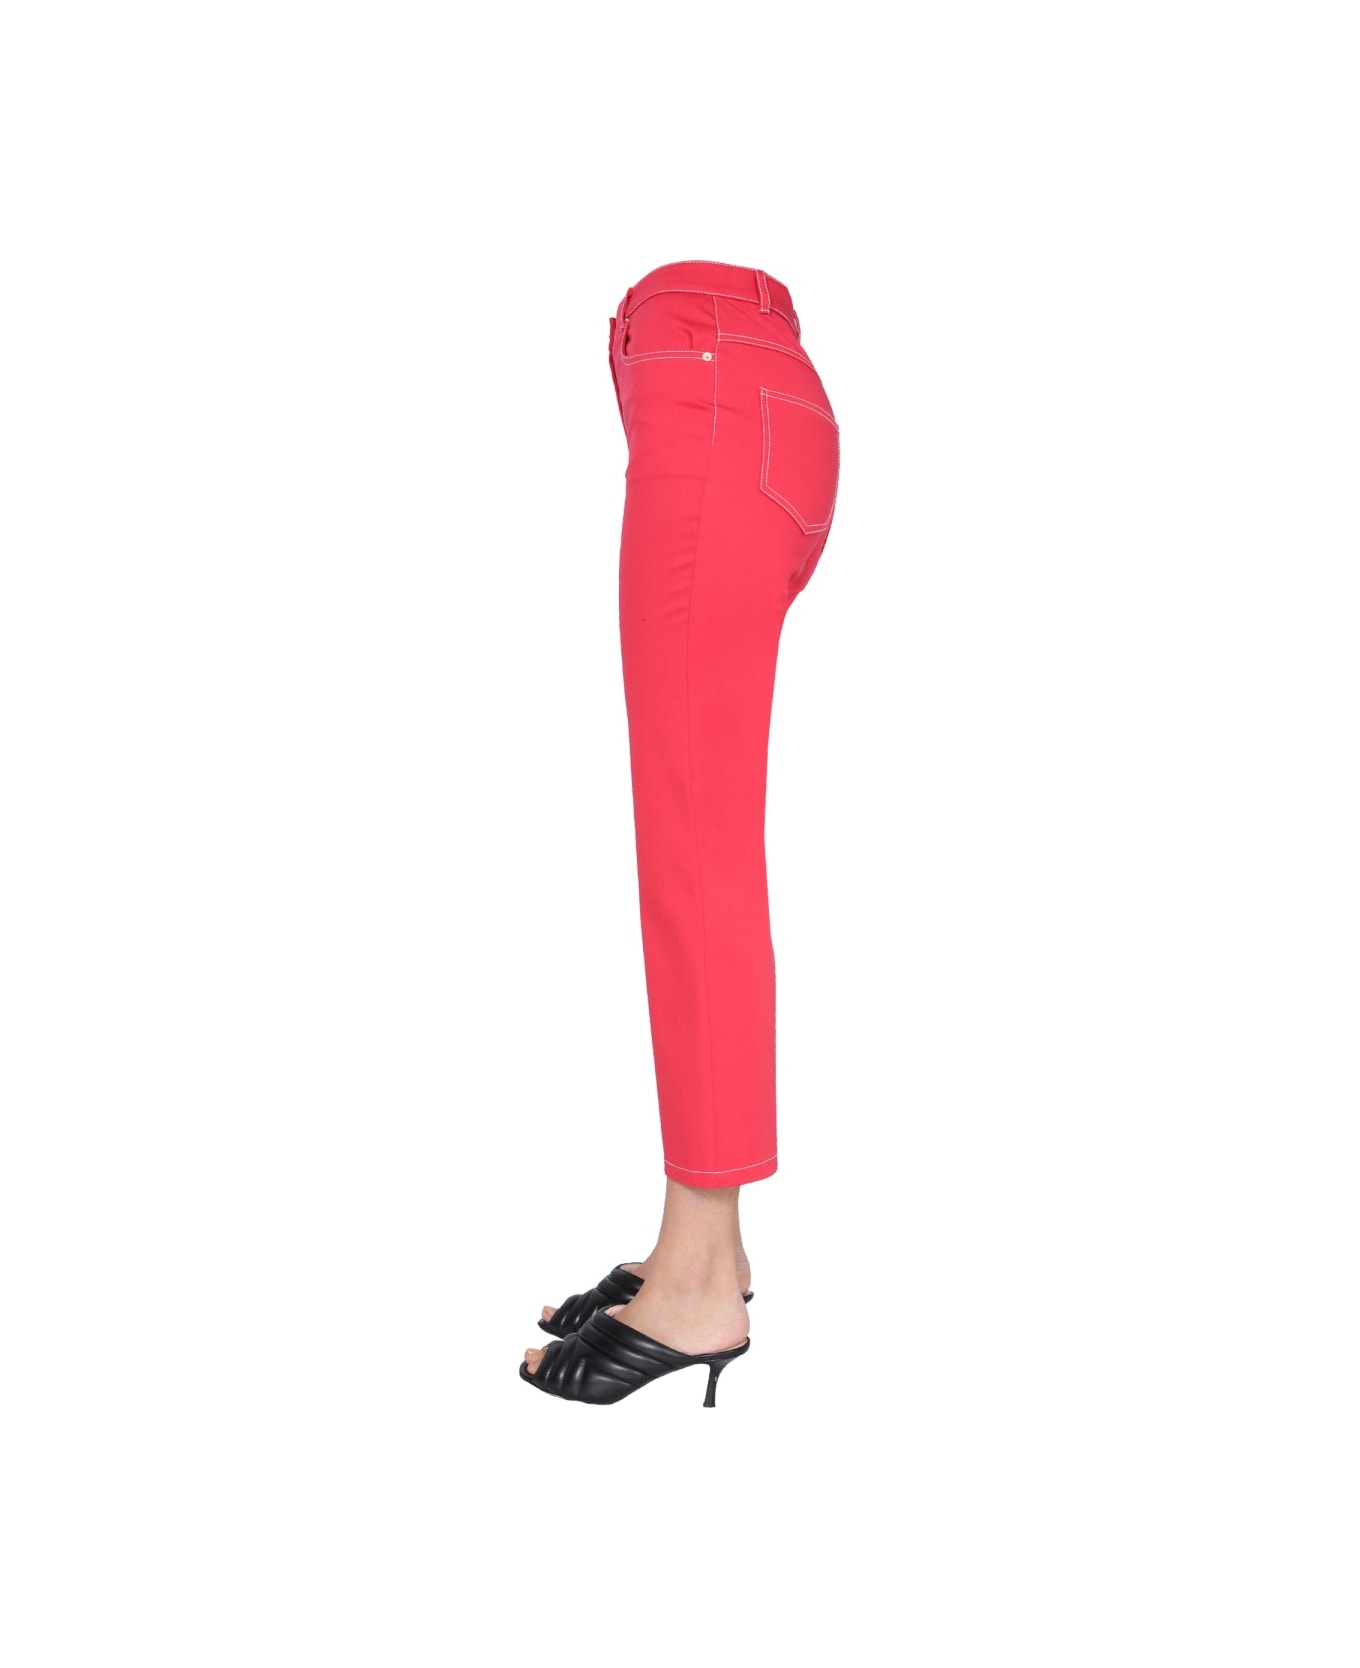 Boutique Moschino Skinny Kick Jeans - RED ボトムス